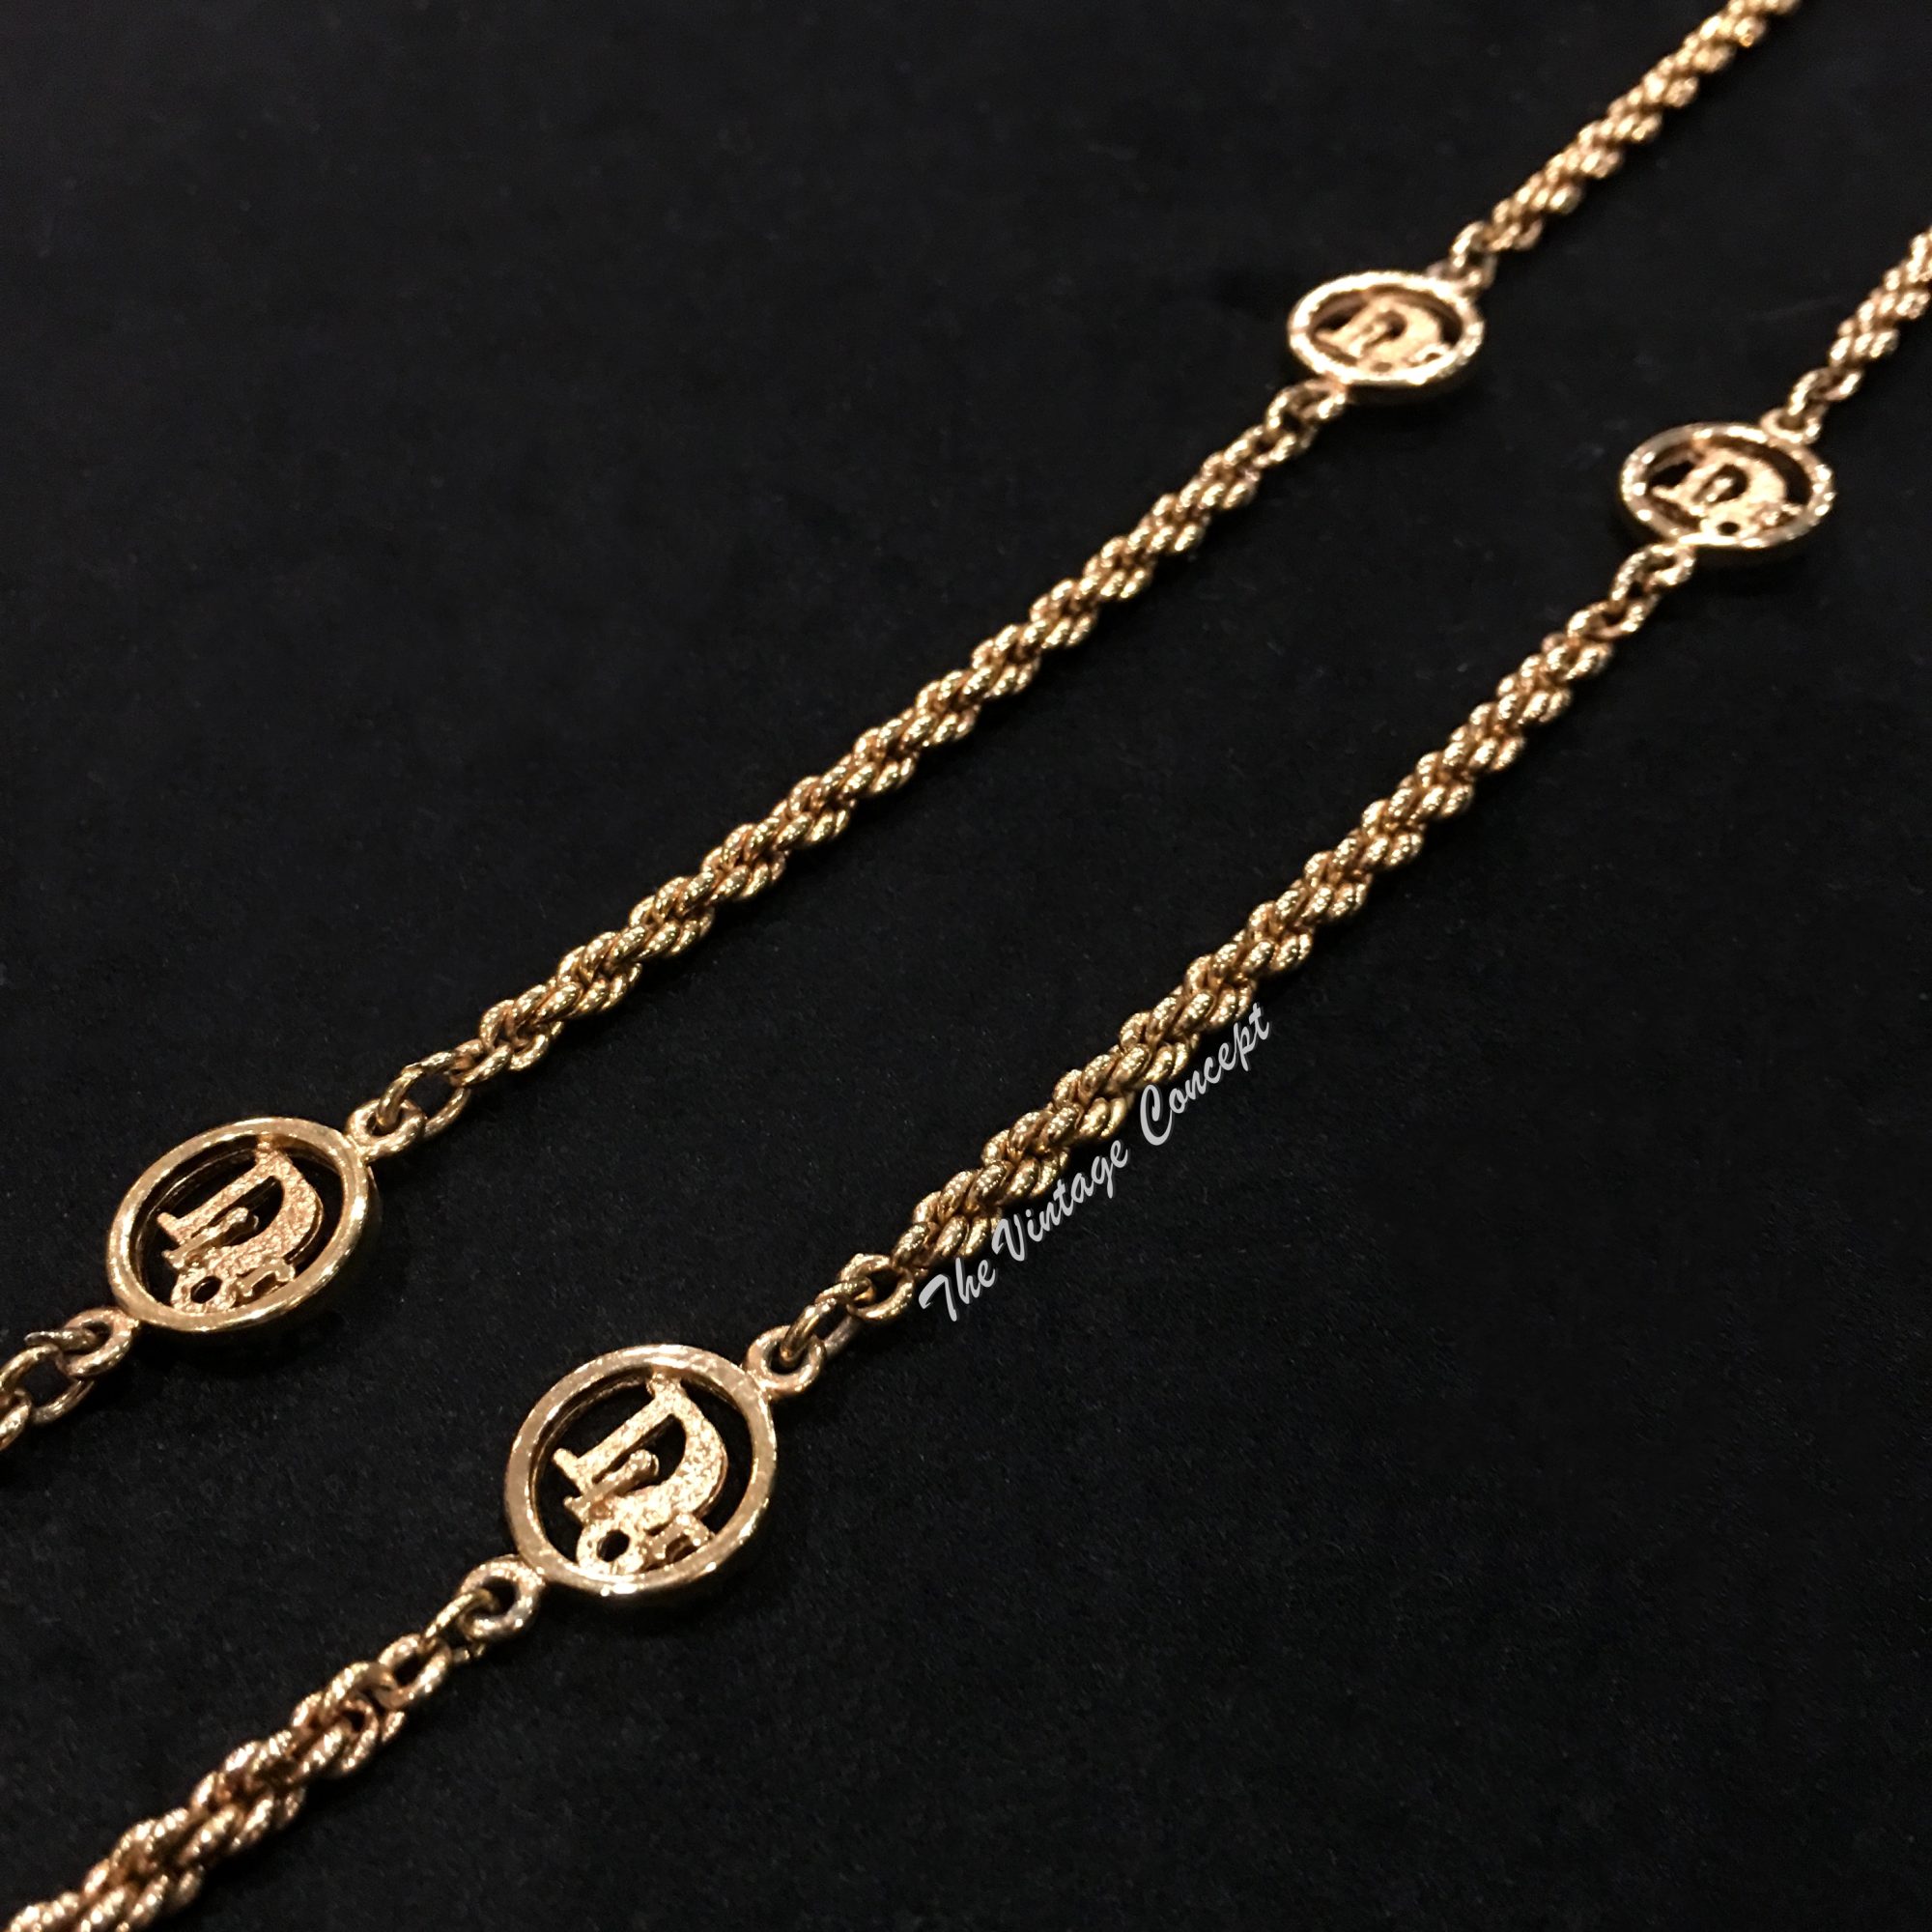 Dior Gold Tone w/ 4 Logo Small Pendants Necklace from 90's (SOLD) - The Vintage Concept